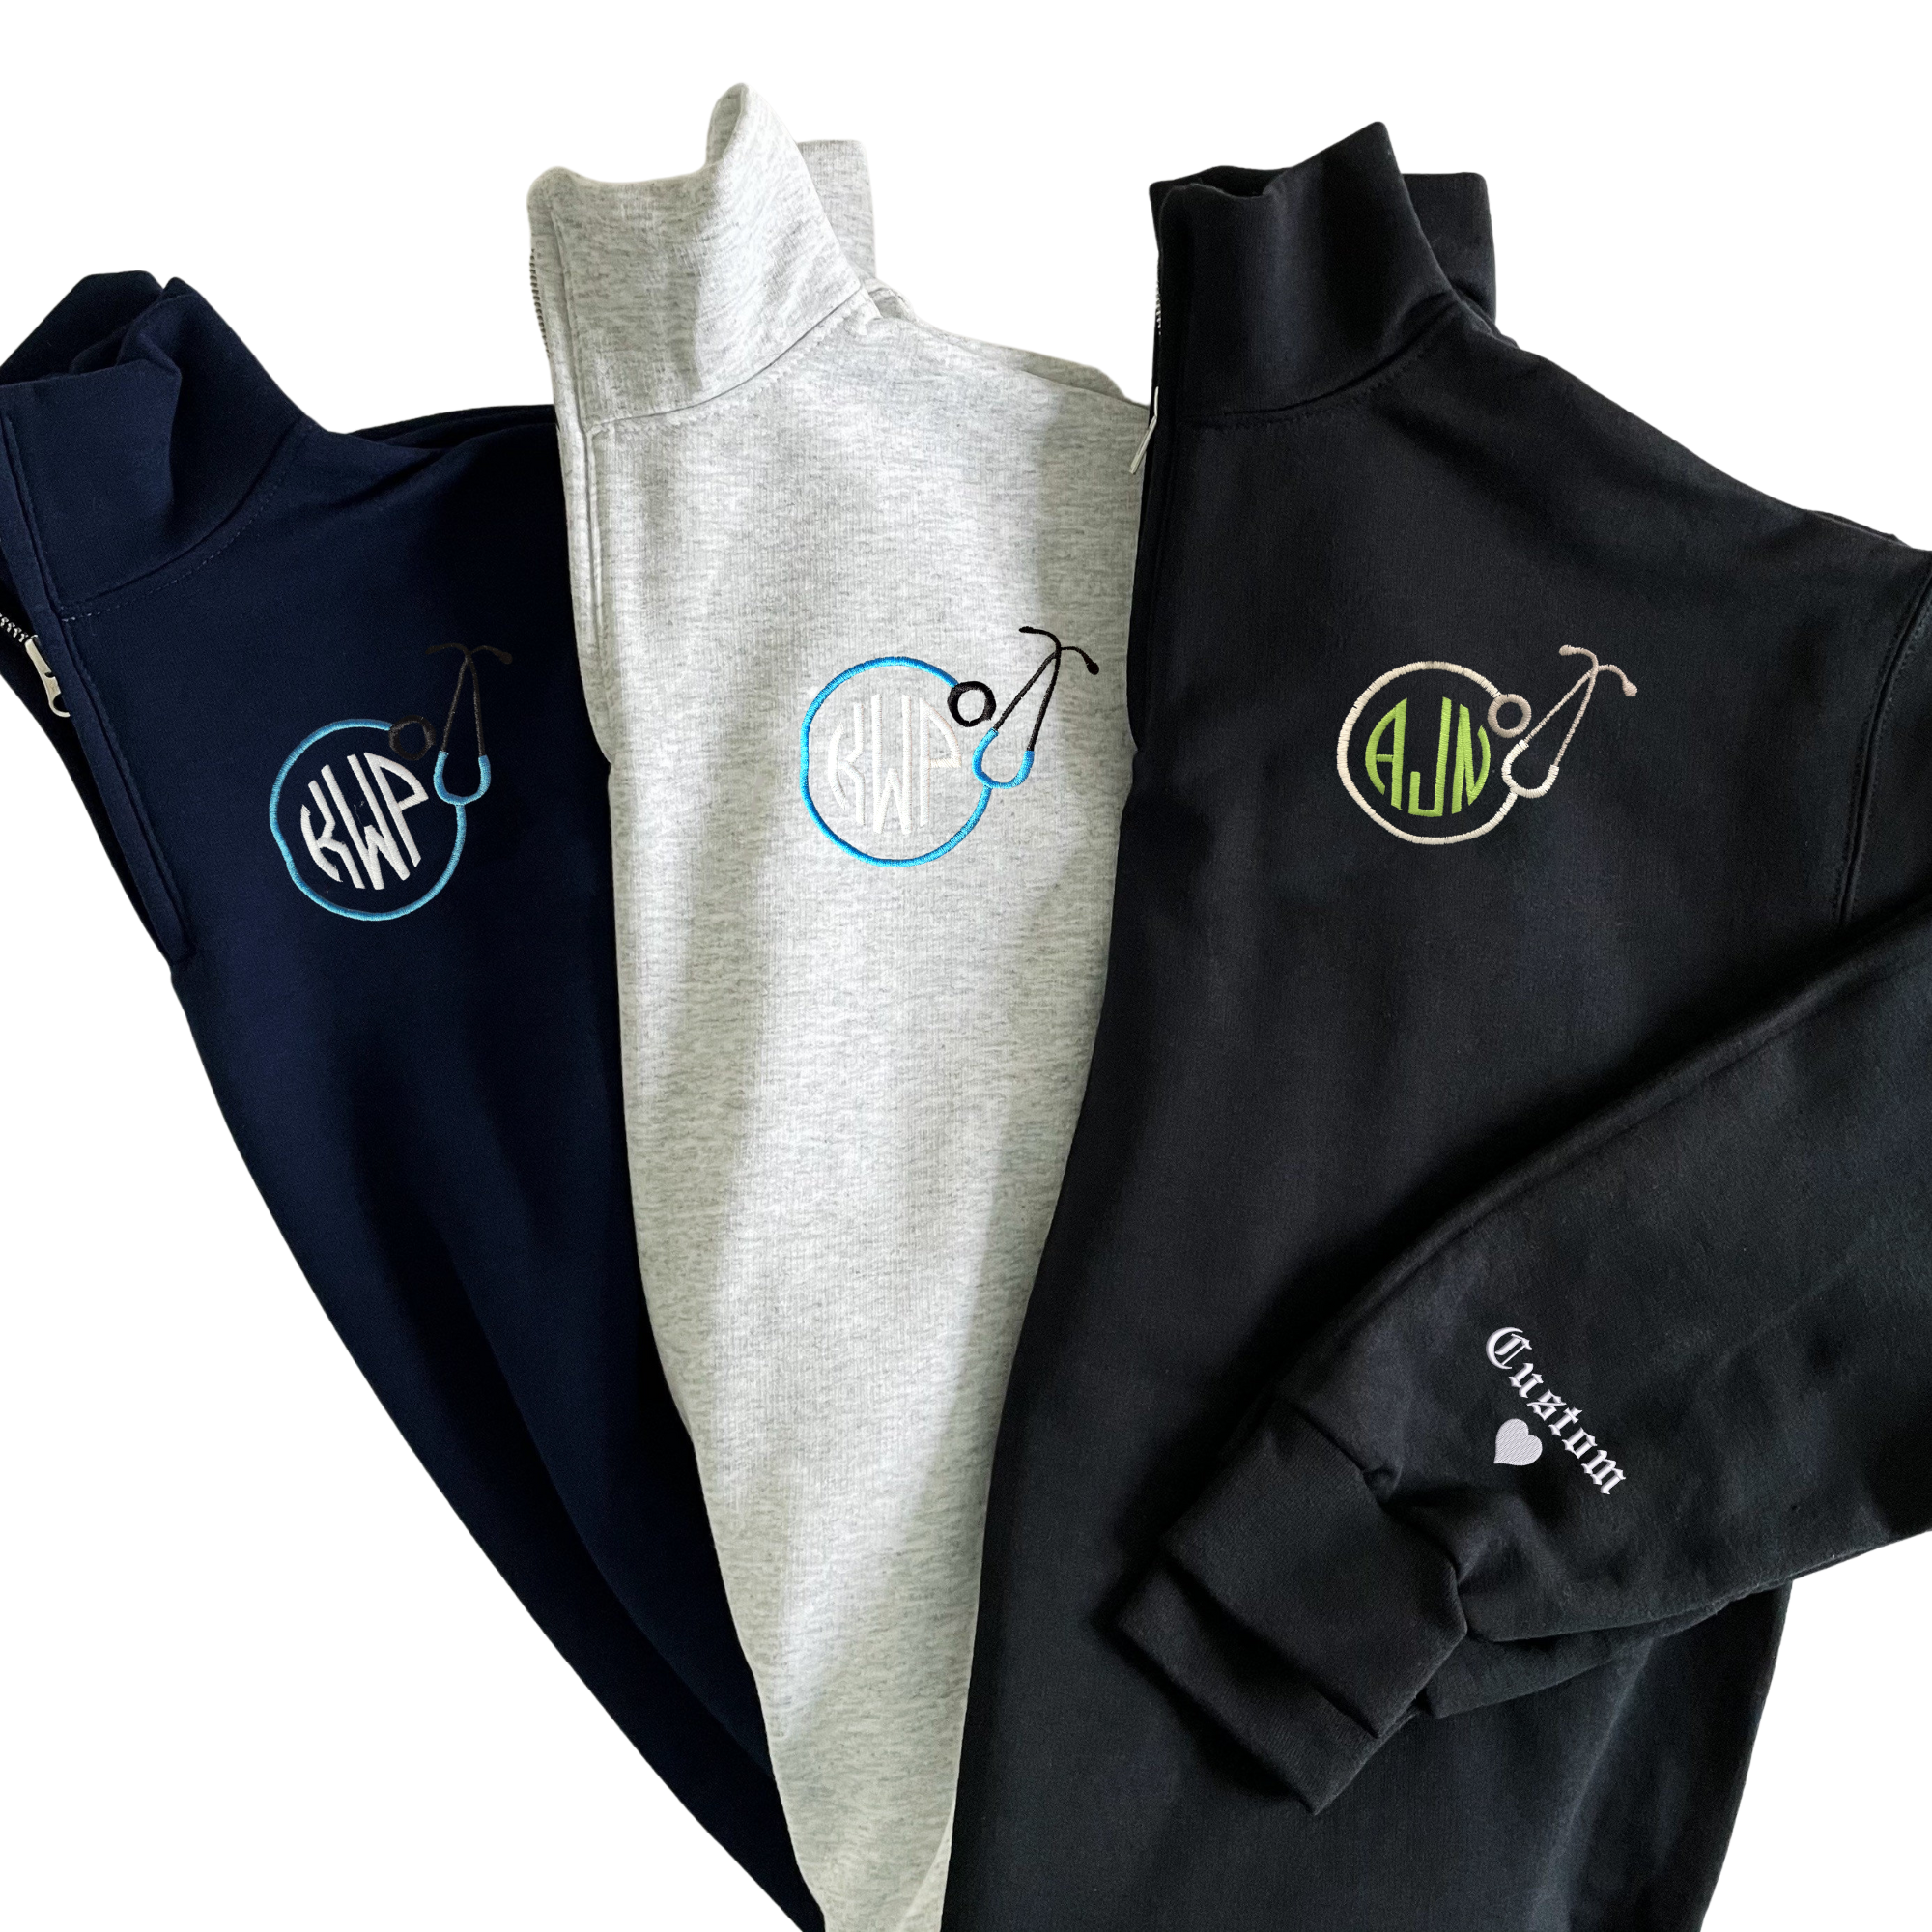 Monogrammed Embroidered Medical Caduceus 1/4 Zip Pullover